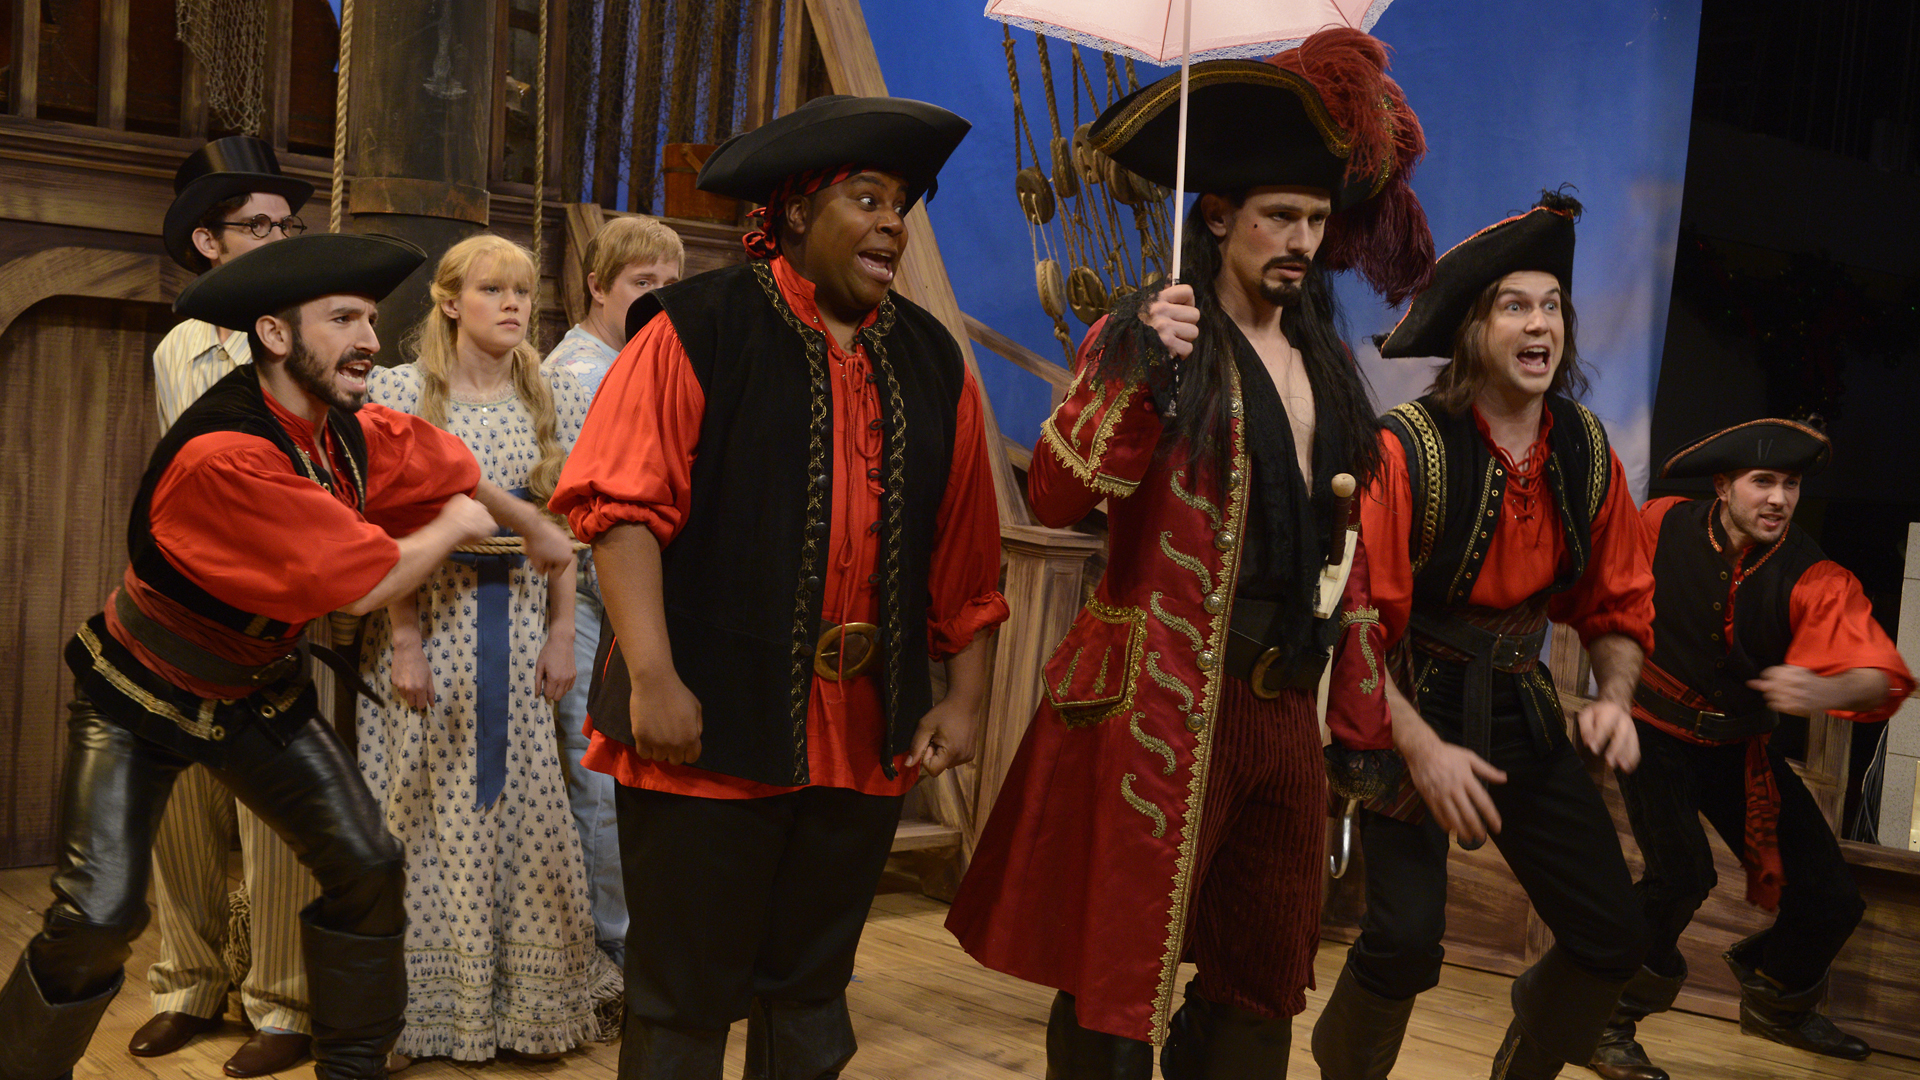 Watch Peter Pan Live! From Saturday Night Live - NBC.com1920 x 1080